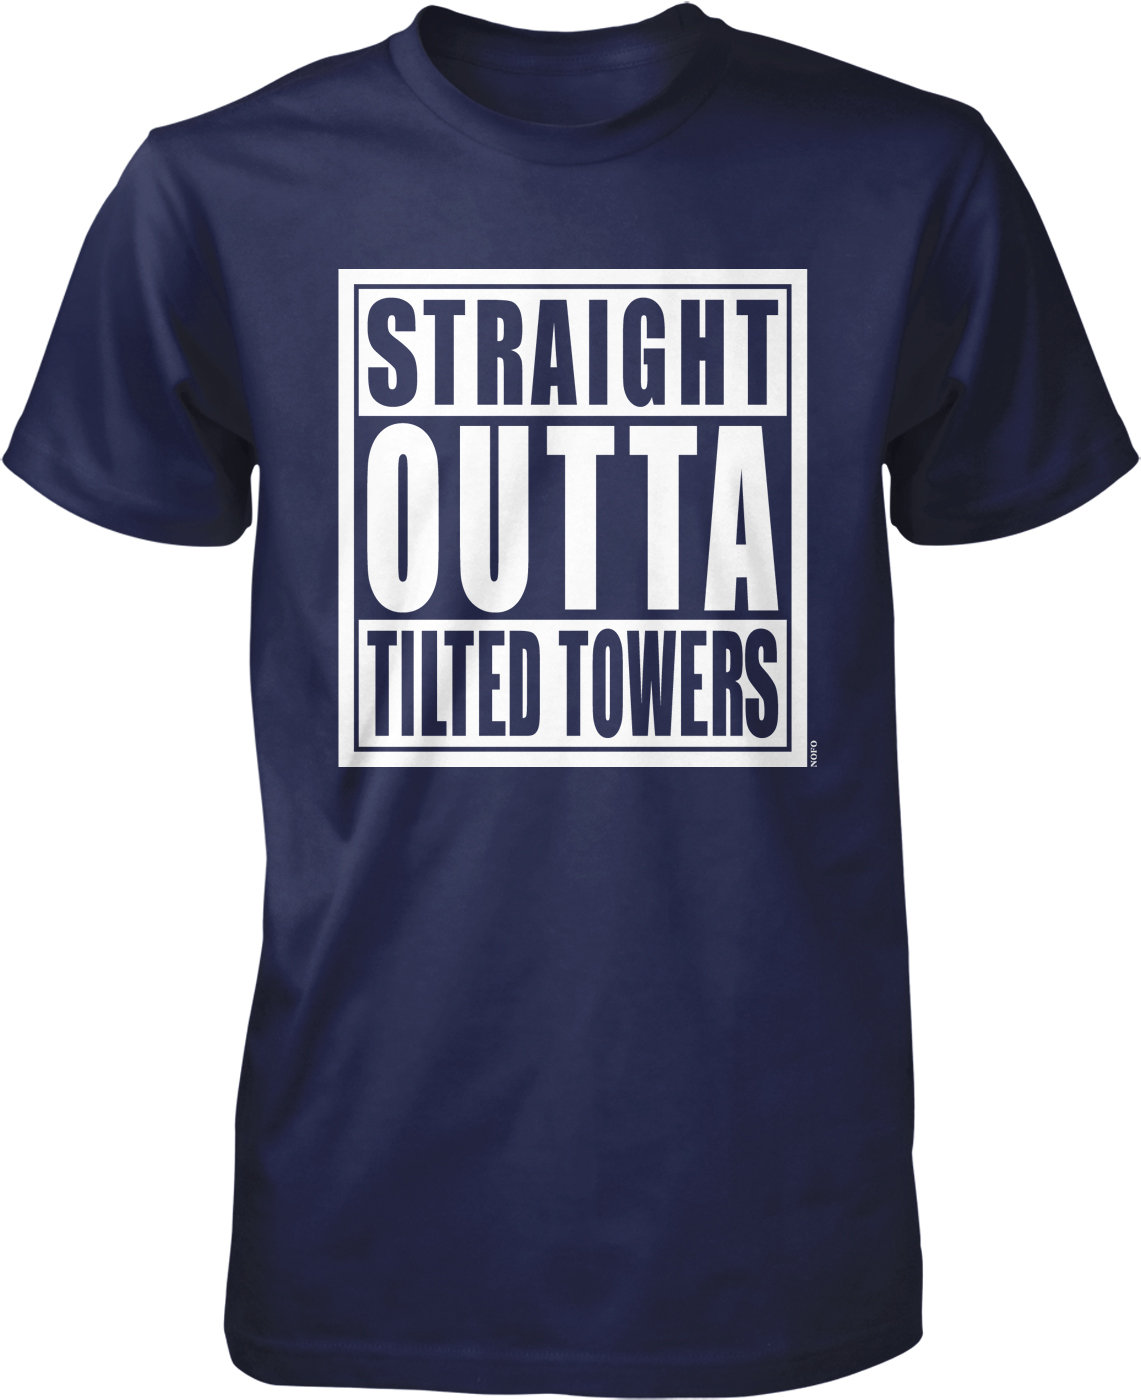 Rute Ejeren kaustisk Straight Outta Tilted Towers Men's T-shirt NOFO_01364 - Etsy